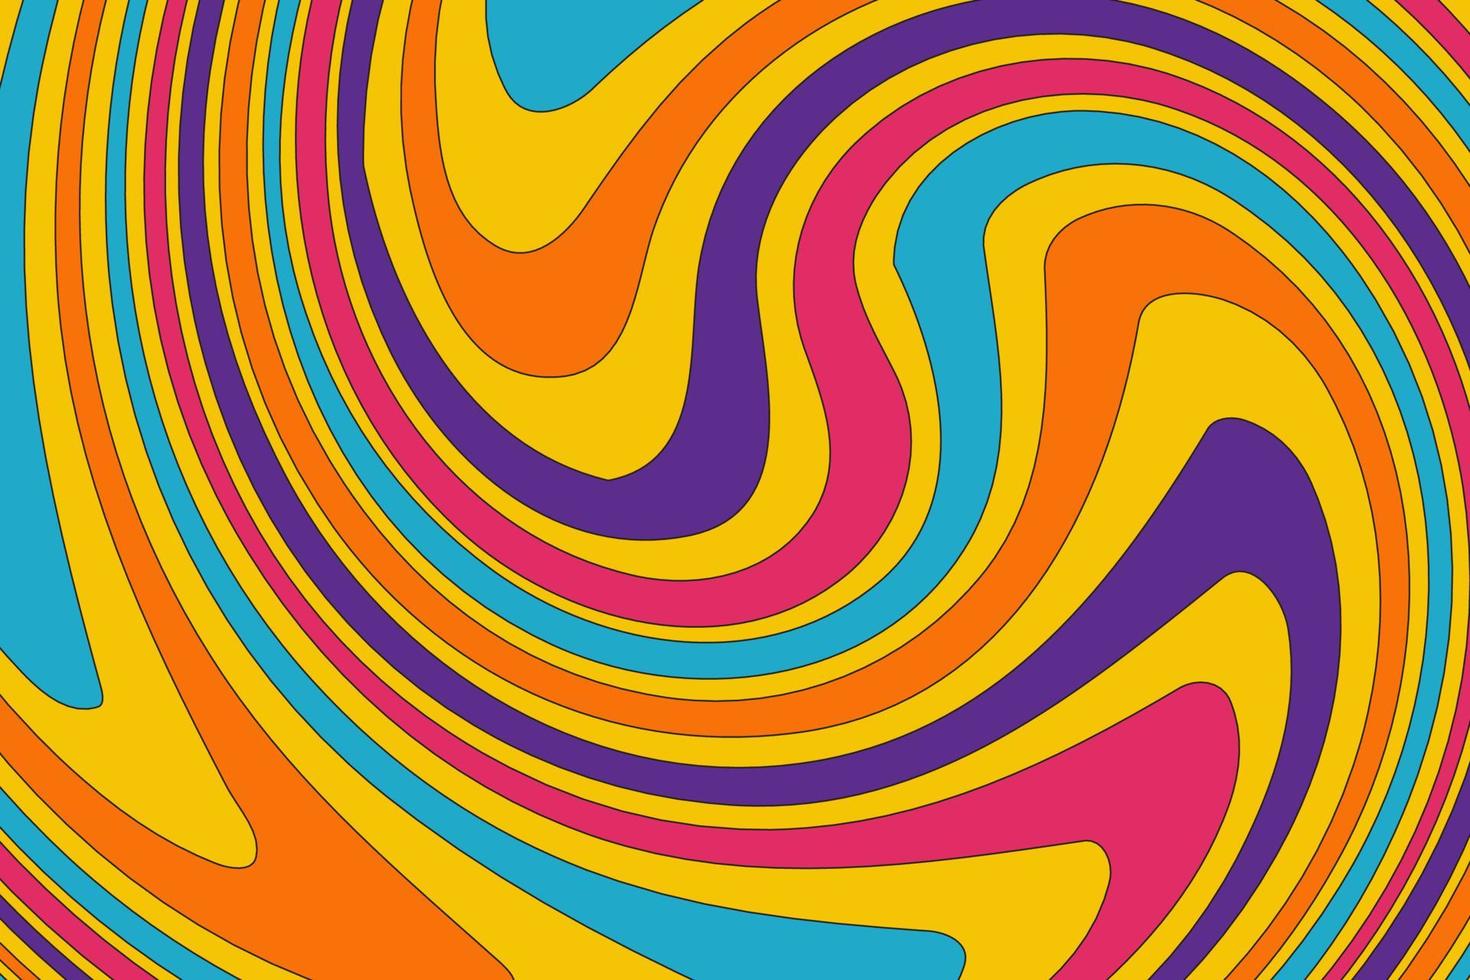 Flat groovy psychedelic background with colorful design vector